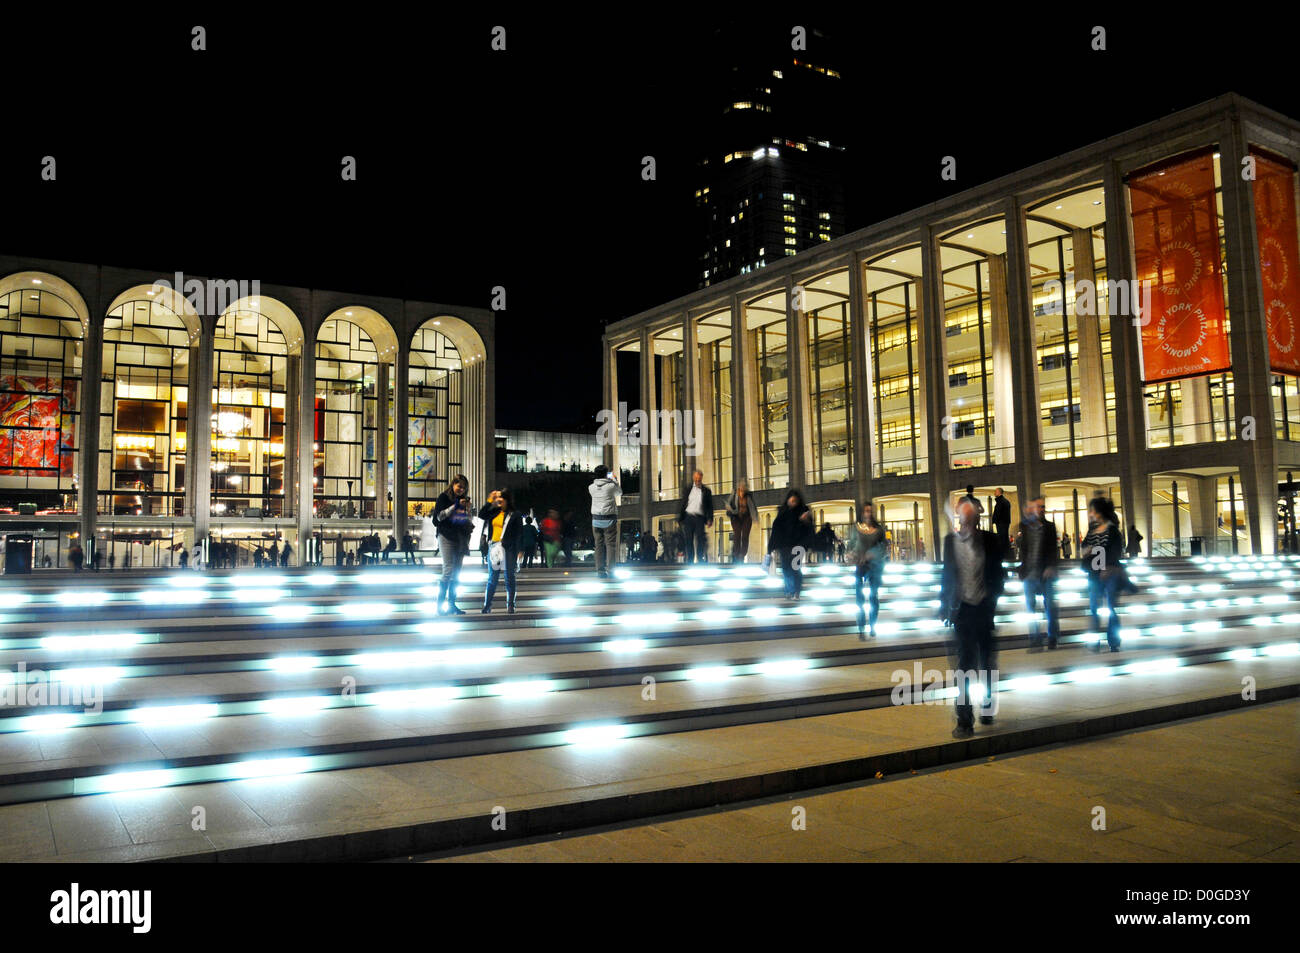 The renovated Lincoln Center Performing Arts center, Broadway, New York City, USA, Stock Photo